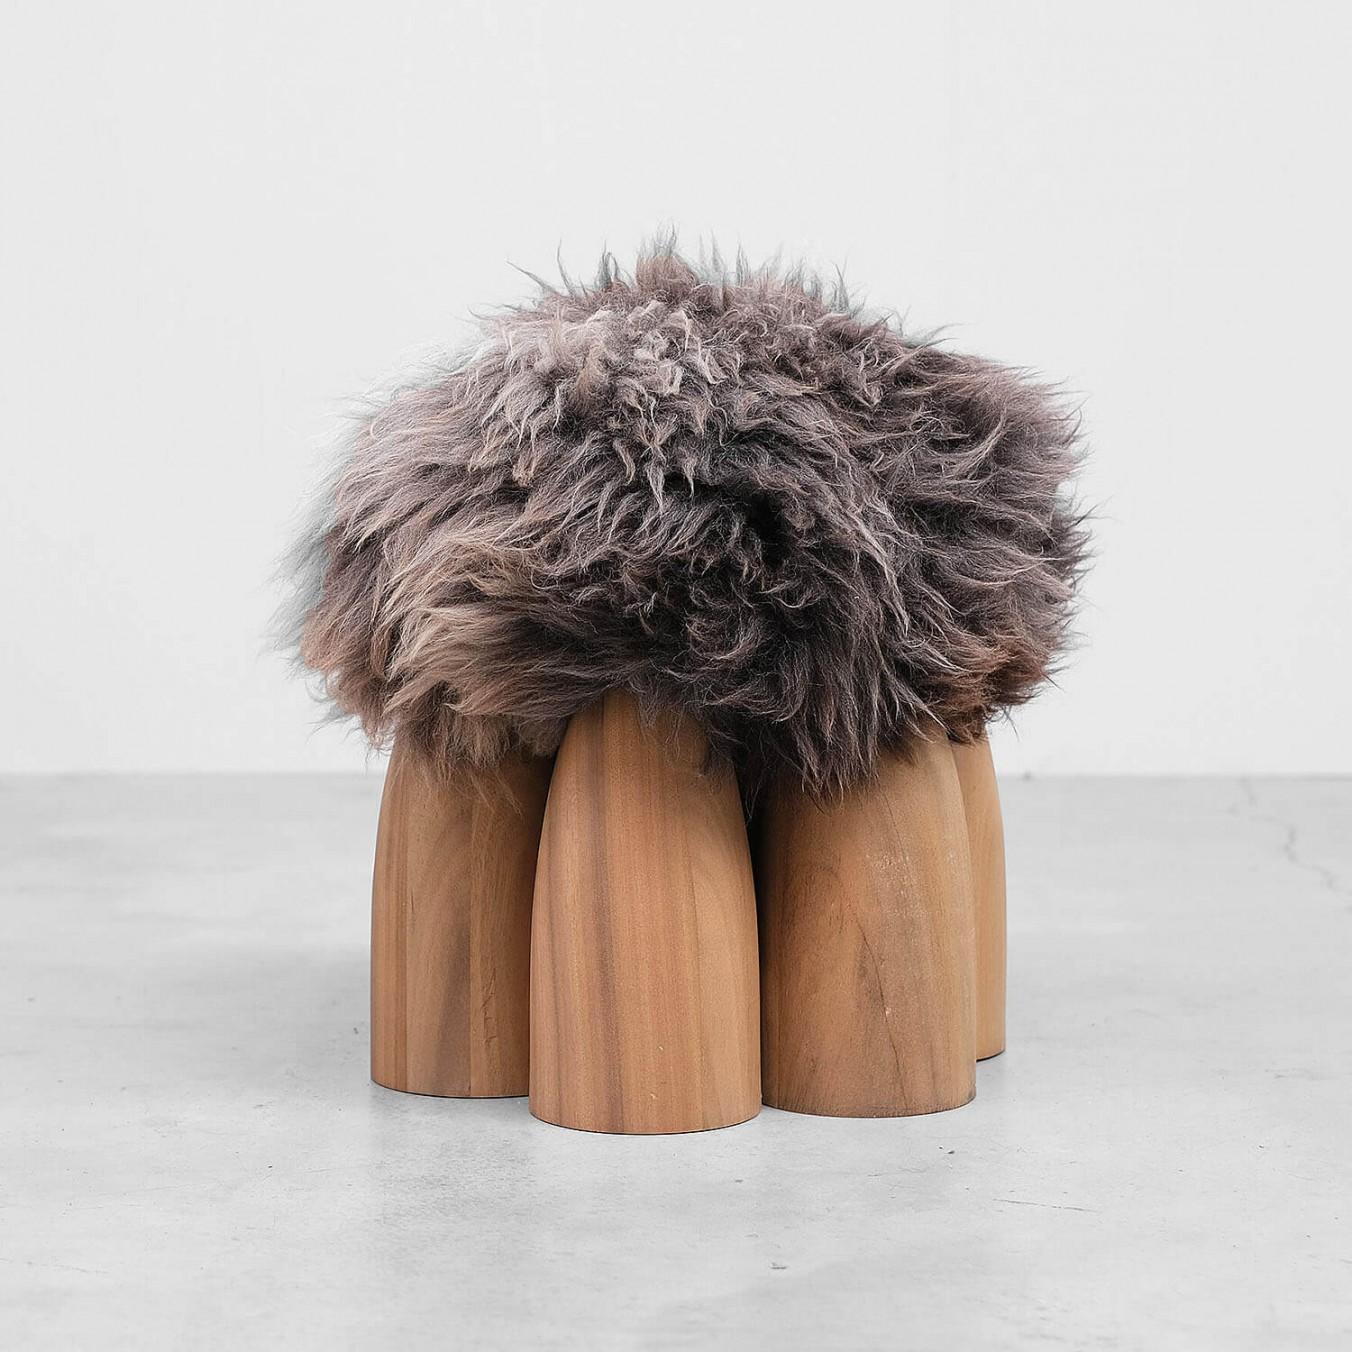 Senufo ottoman in African walnut by Arno Declercq
Made African walnut and sheep wool. (ask for different wool colors)
*Fur color based on availability
Measures: L 45 cm x W 45 cm x H 40 cm, L 17.7” x W 17.7” x H 15.7”

Material: African walnut

Made